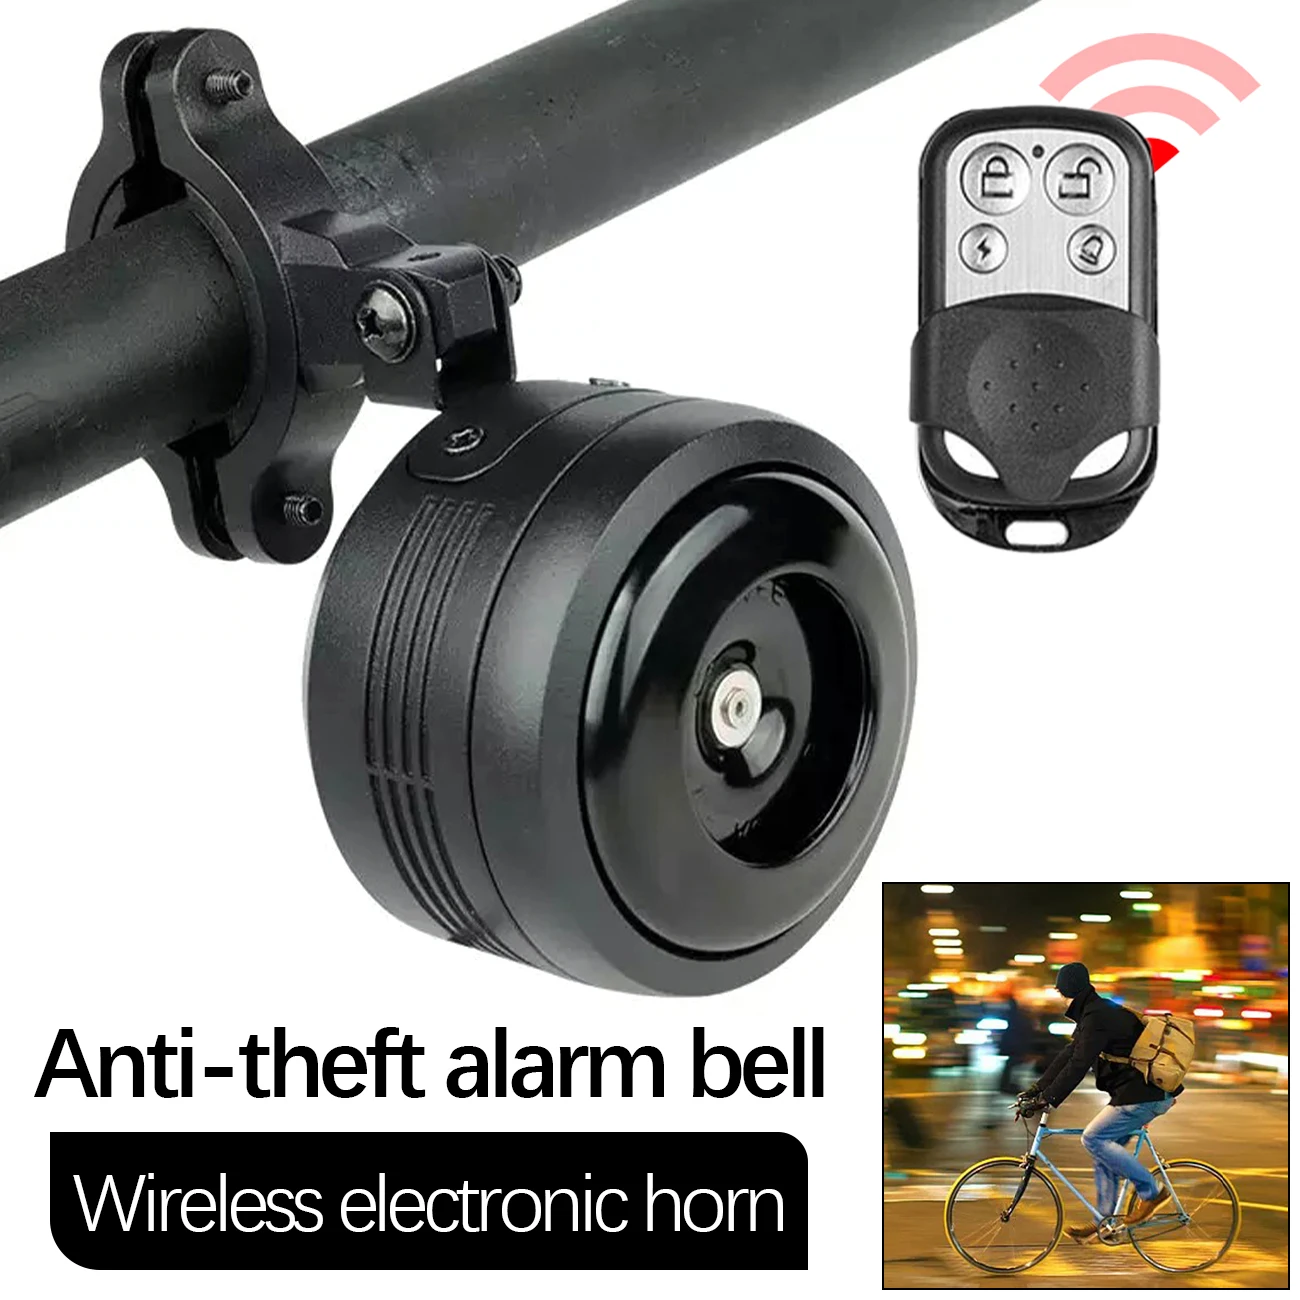 

125db USB Charging 1300 MAh Bicycle Electric Bell Cycle Motorcycle Scooter Trumpet Horn Anti-Theft Alarm Siren & Remote Control